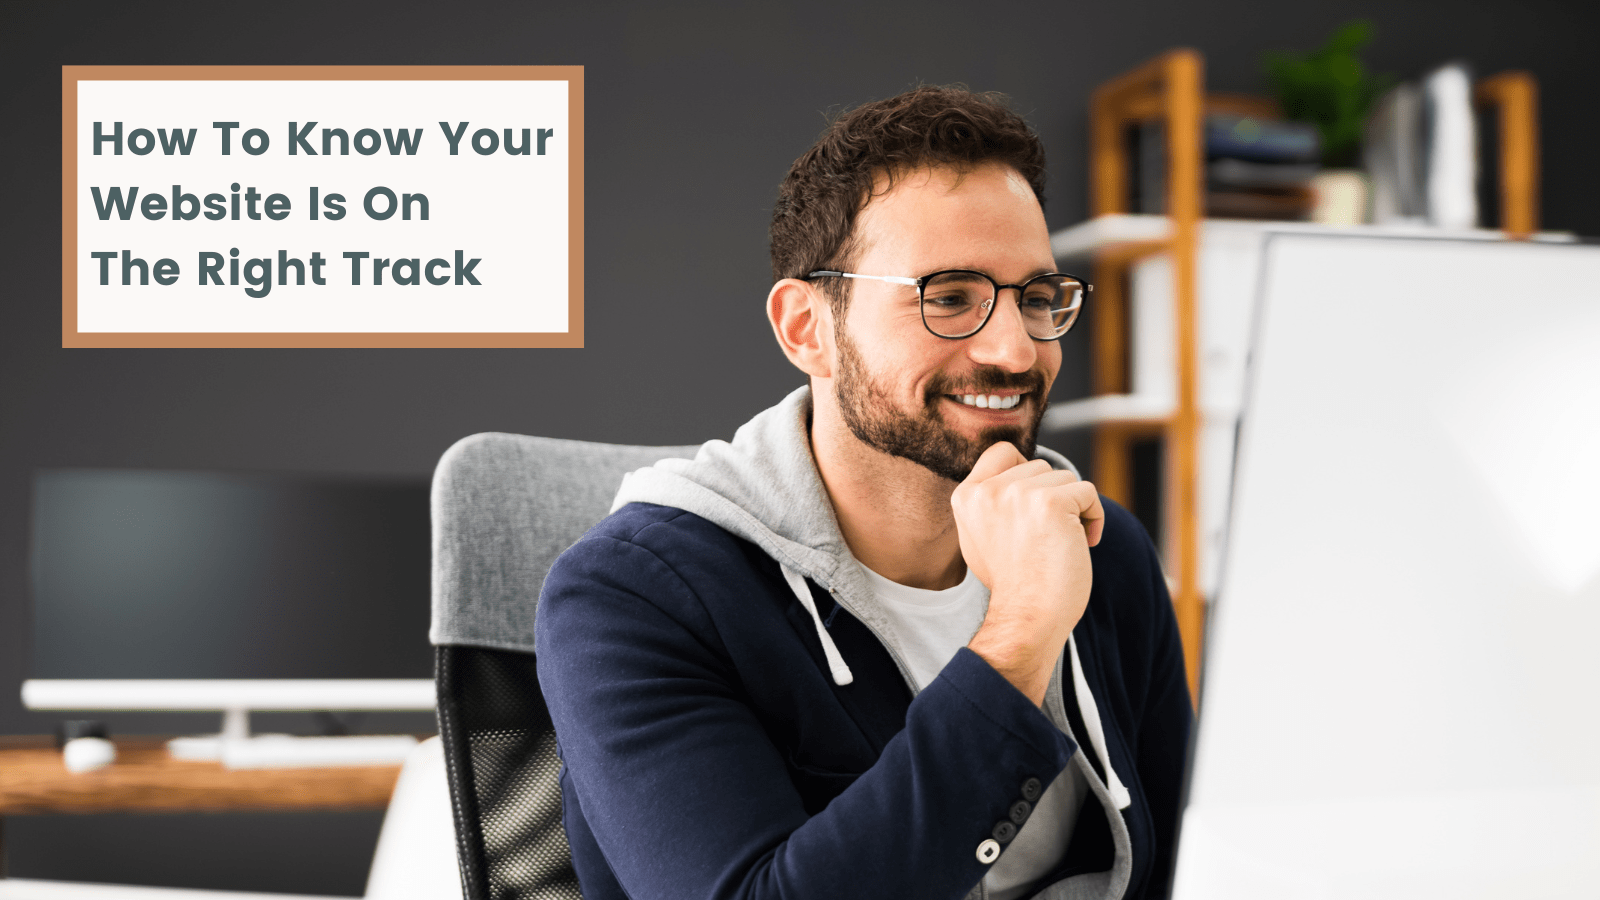 How To Know Your Website Is On The Right Track